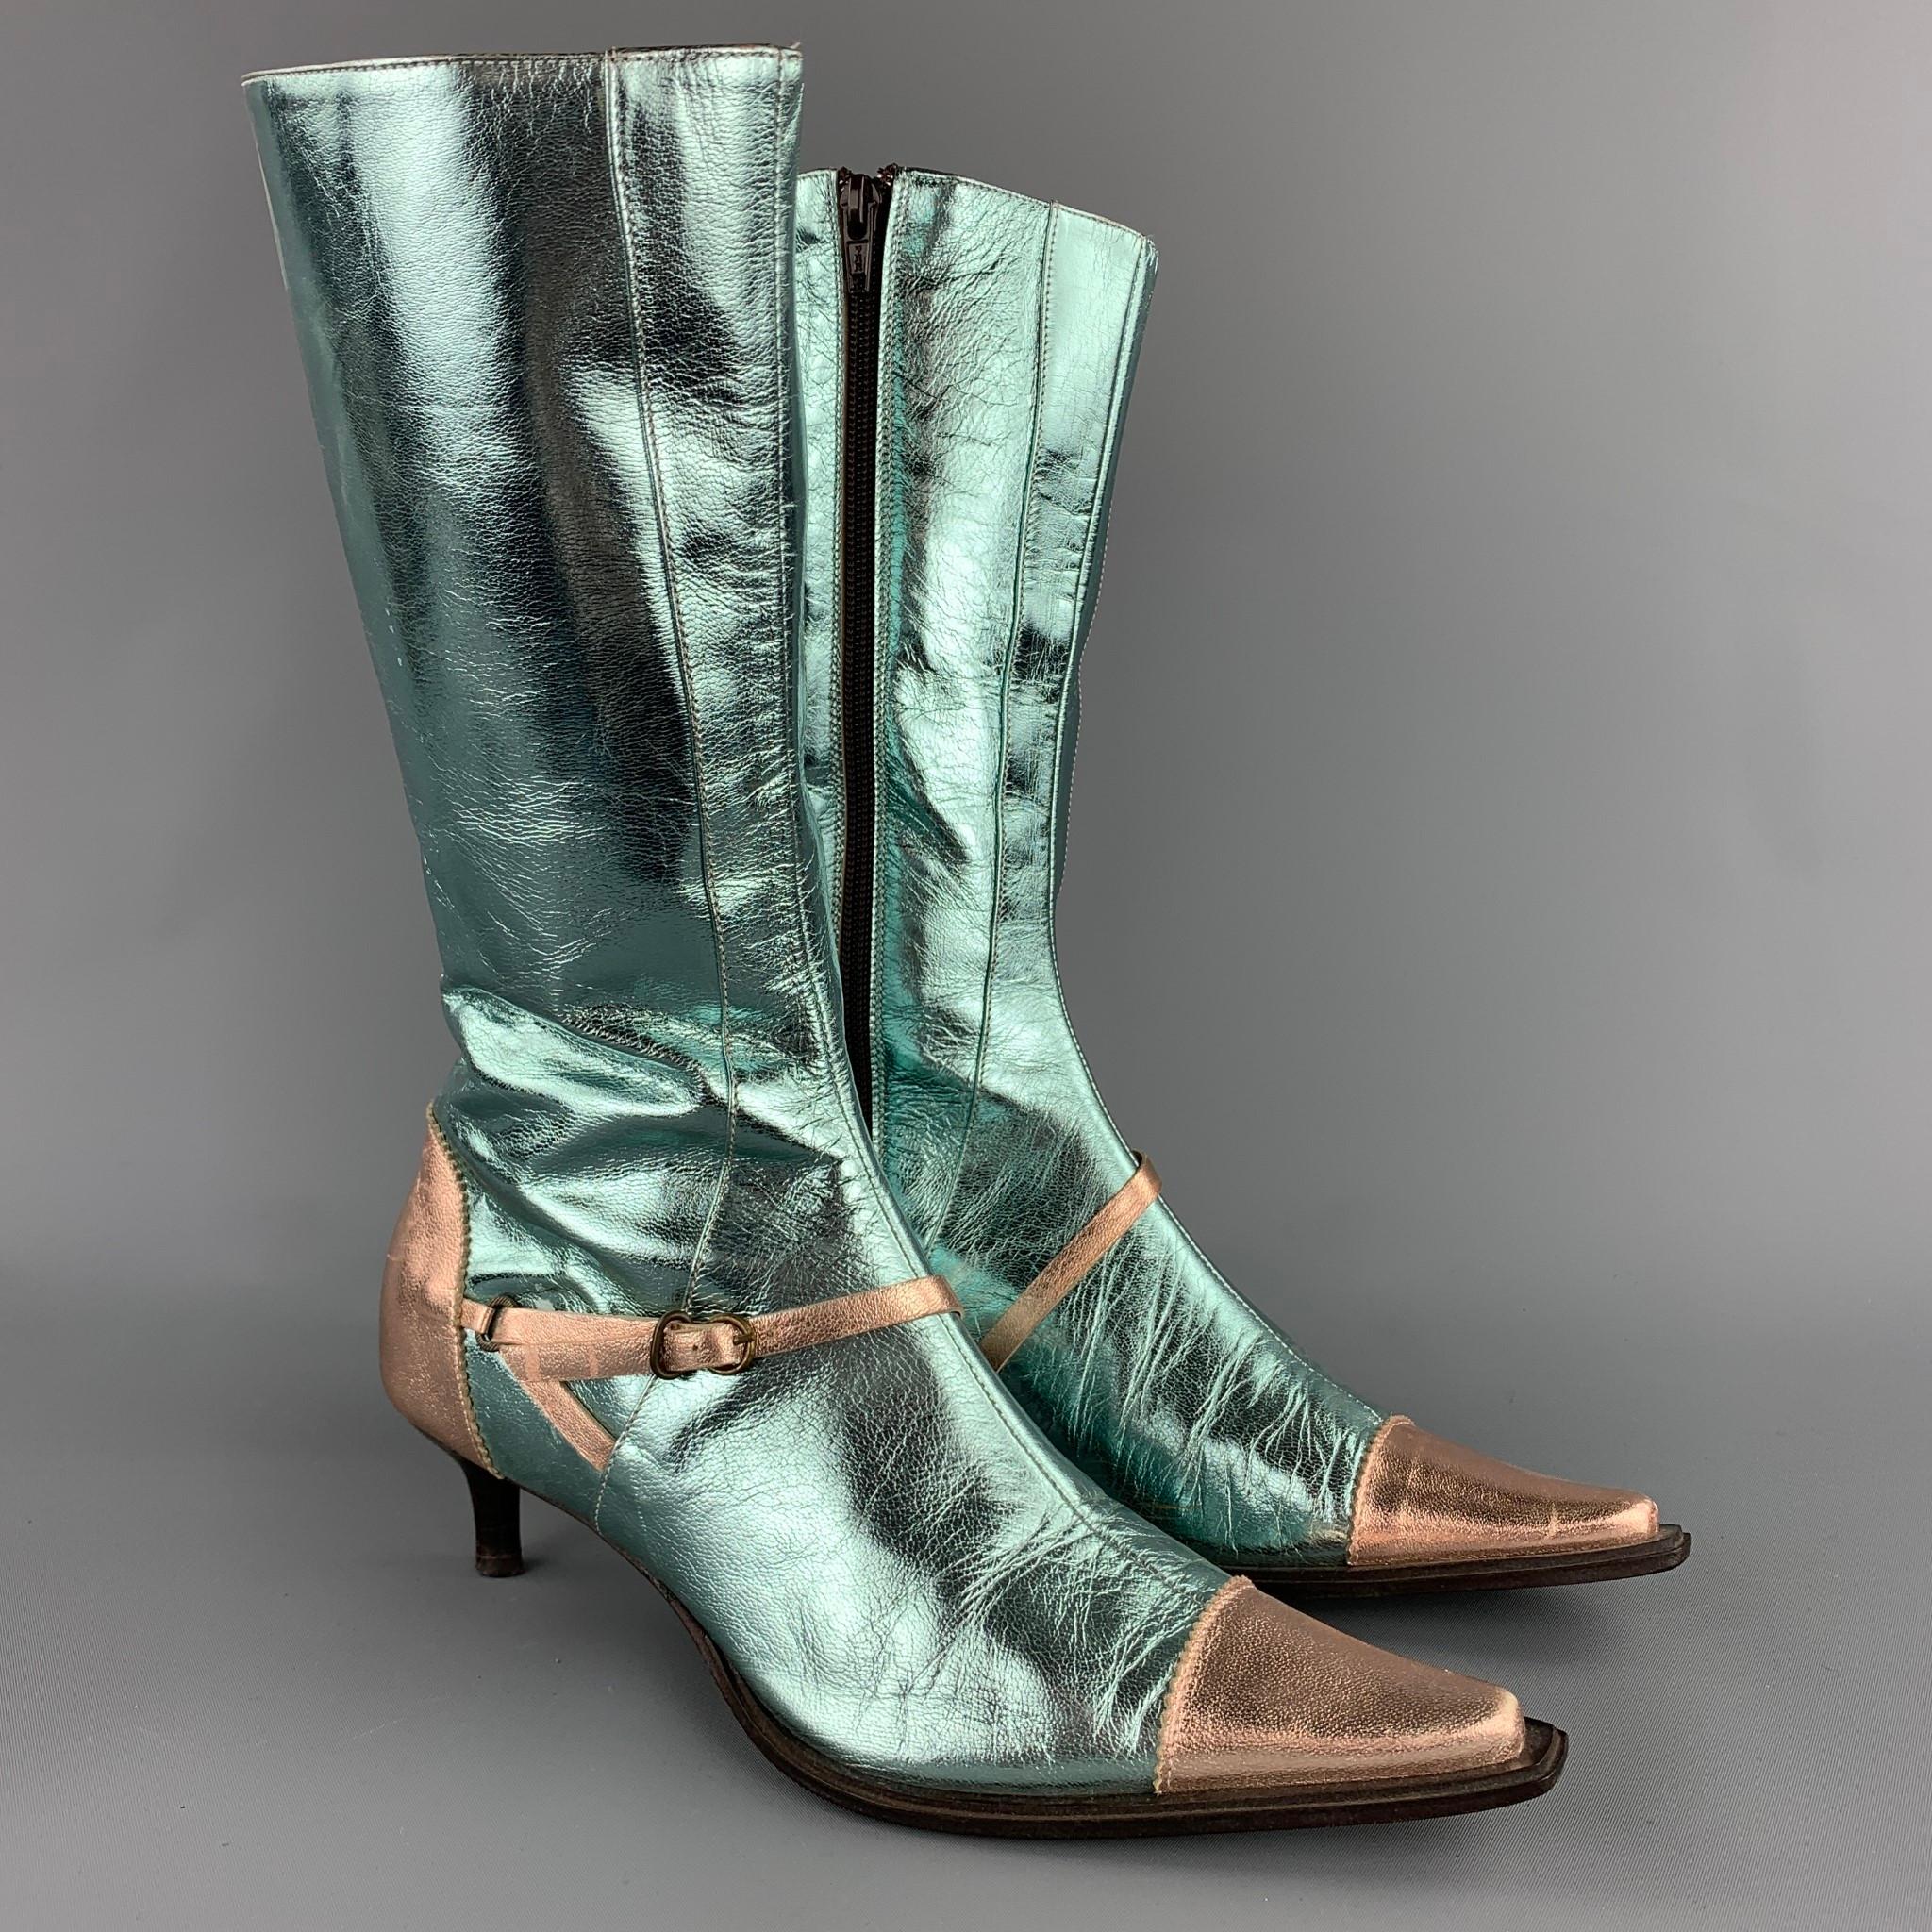 PAOLO IANTORNO boots comes in a aqua & rose gold metallic patent leather featuring a pointed toe, mid-calf, kitten heel, and a side zip up closure. Made in Italy.

Good Pre-Owned Condition.
Marked: EU 36.5

Measurements:

Length: 10 in.
Height: 11